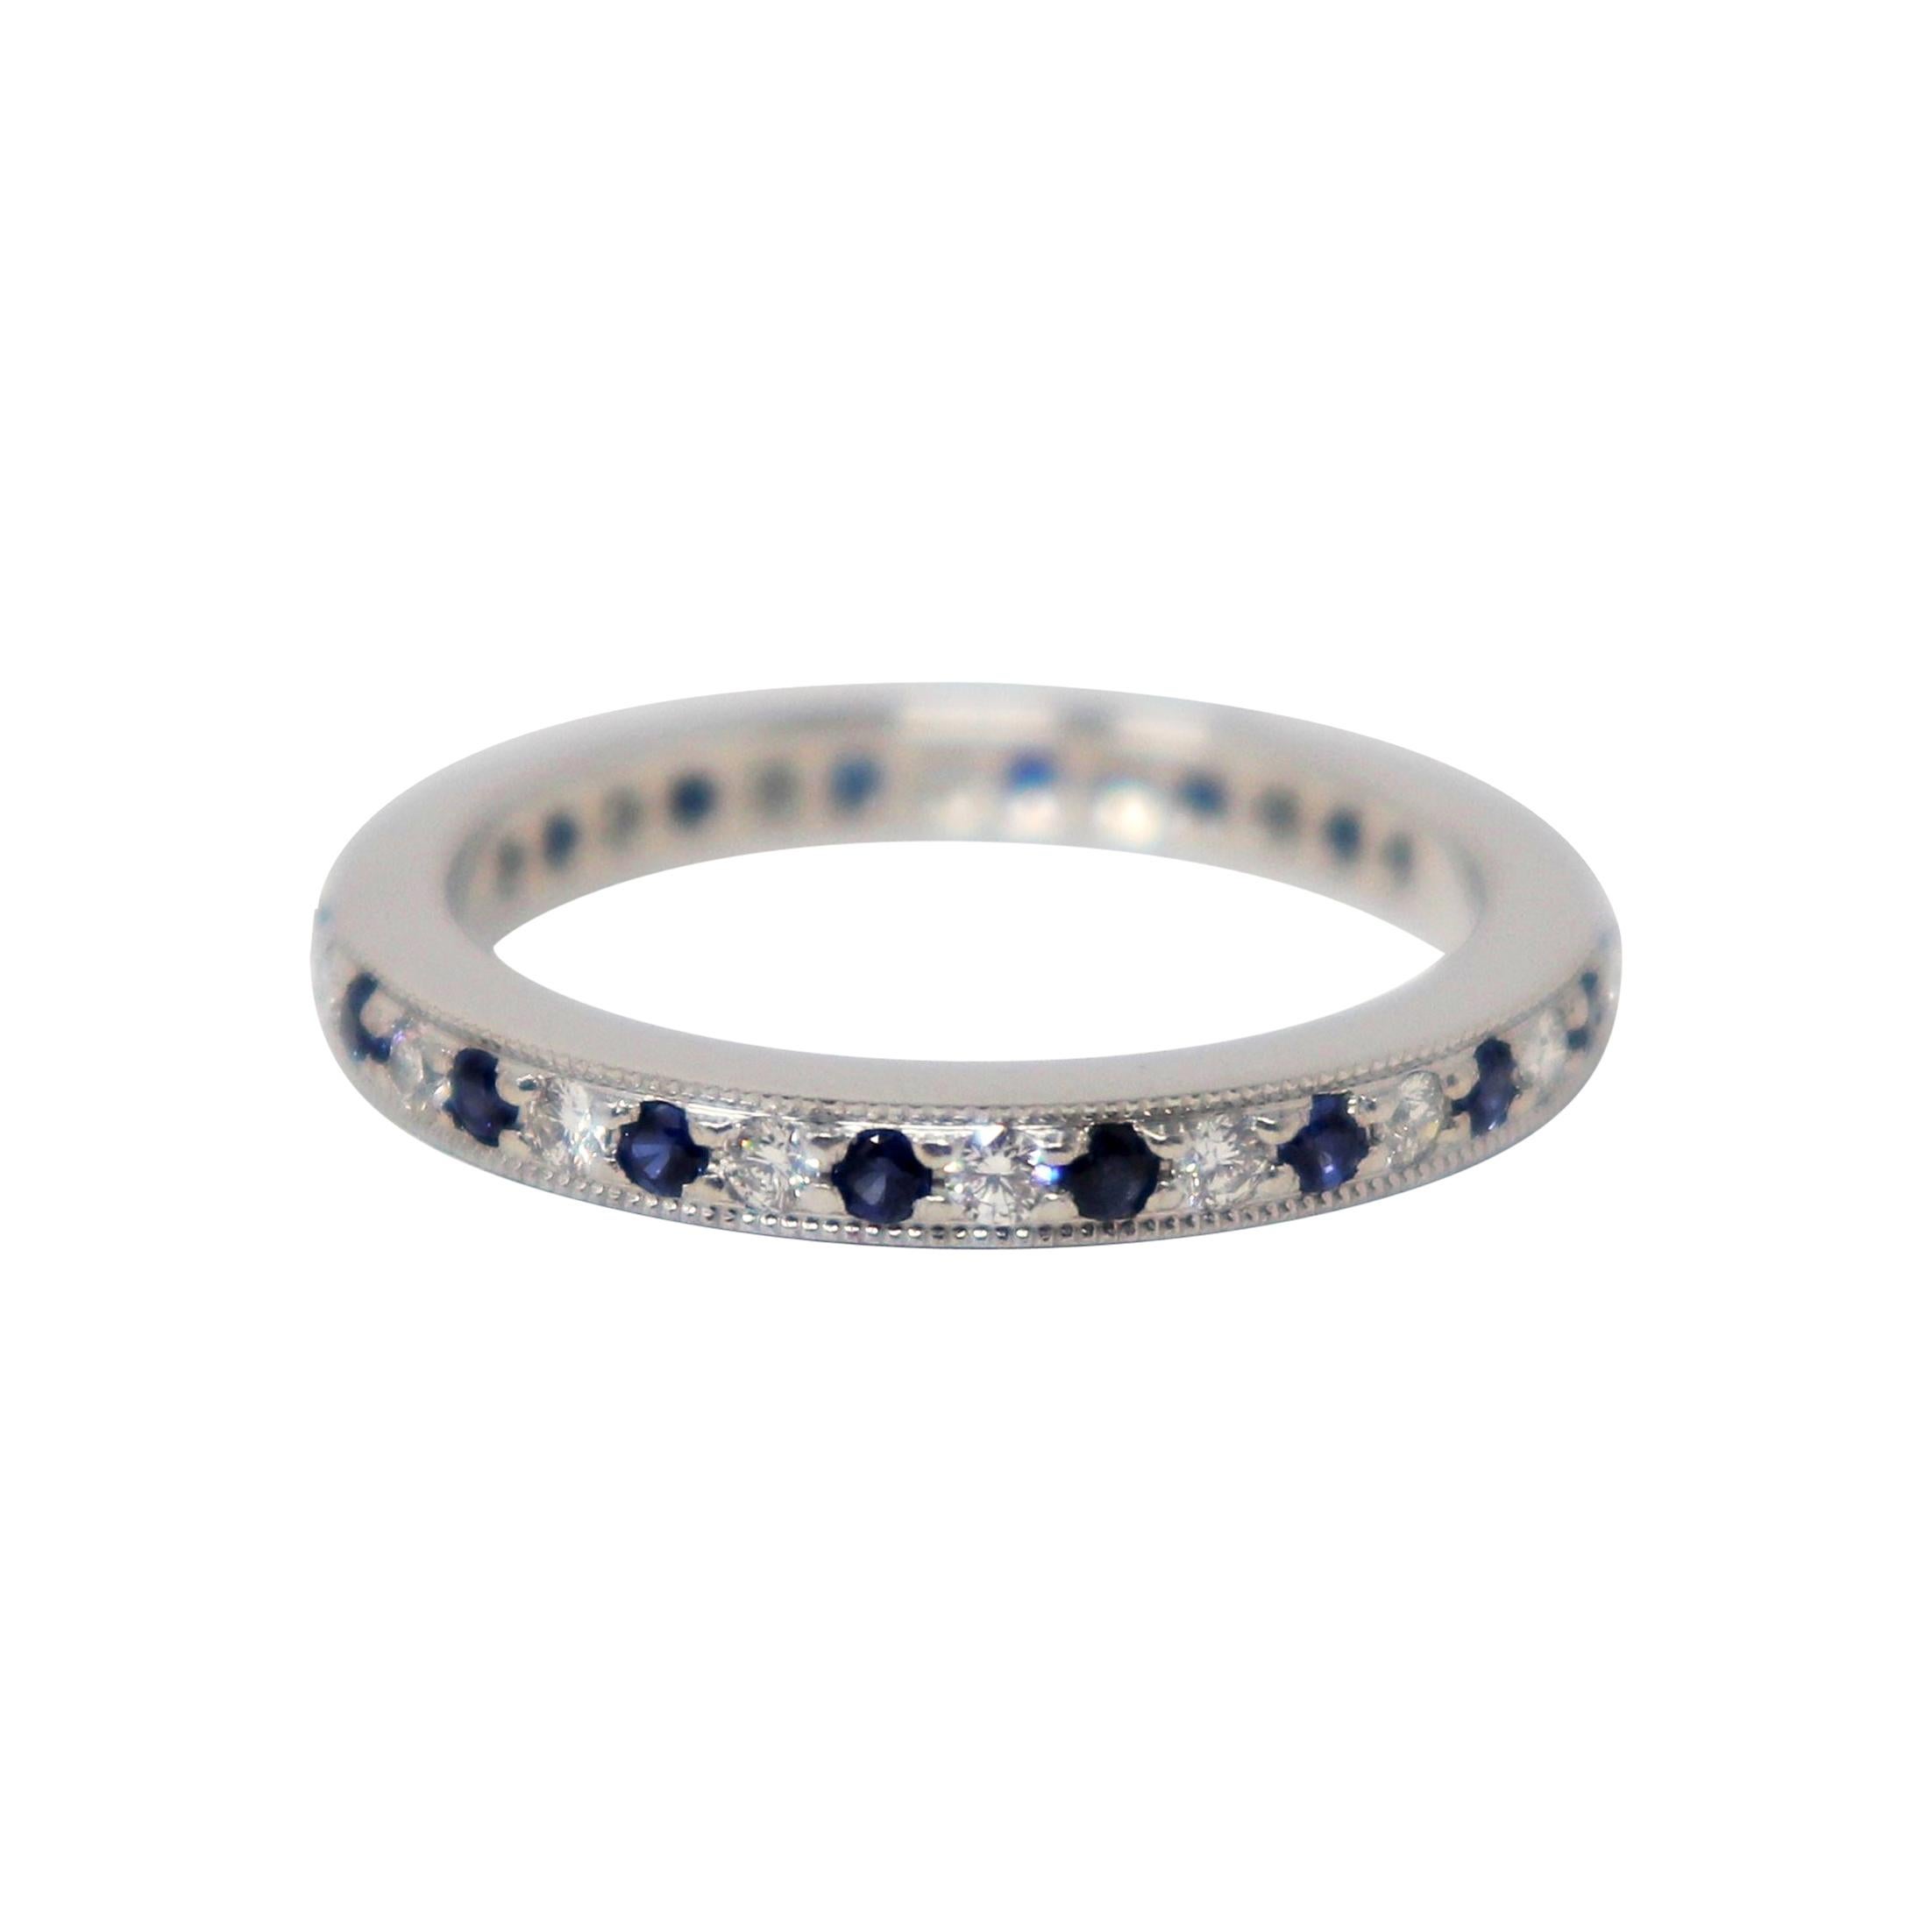 Tiffany & Co. Legacy Collection Sapphire/ Diamond Eternity Band Ring in Platinum